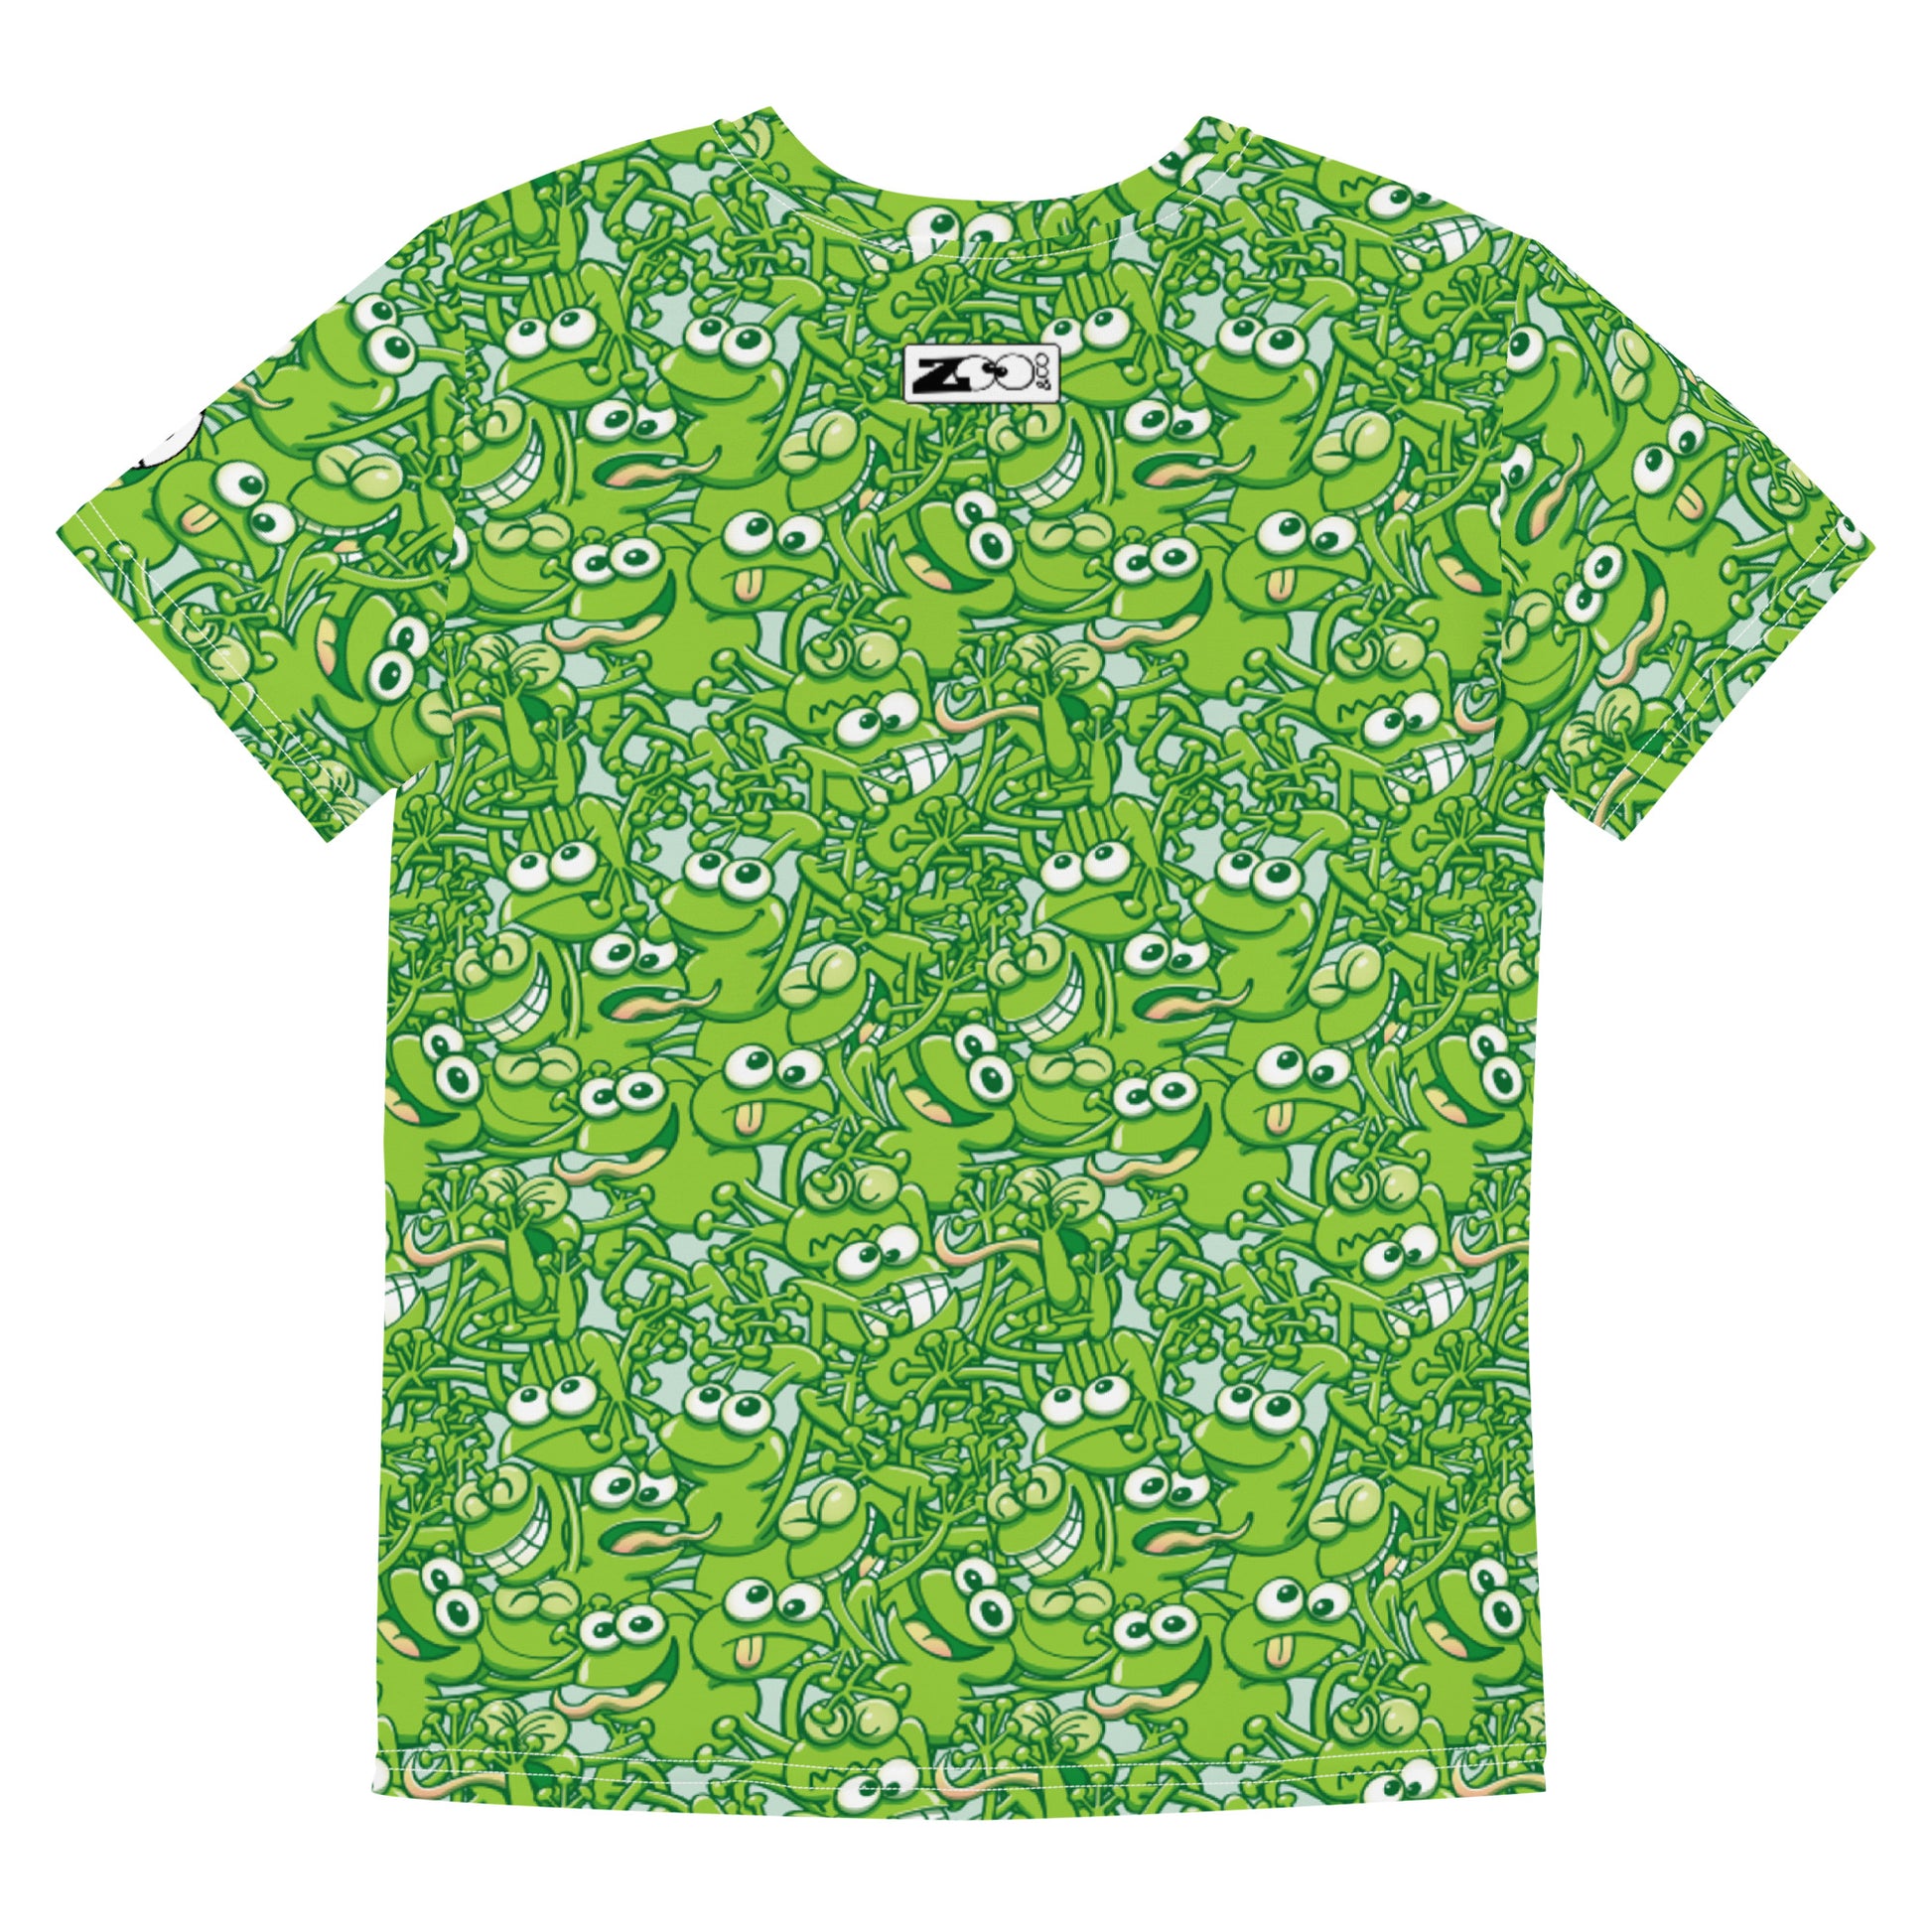 A tangled army of happy green frogs appears when the rain stops Youth crew neck t-shirt. Back view